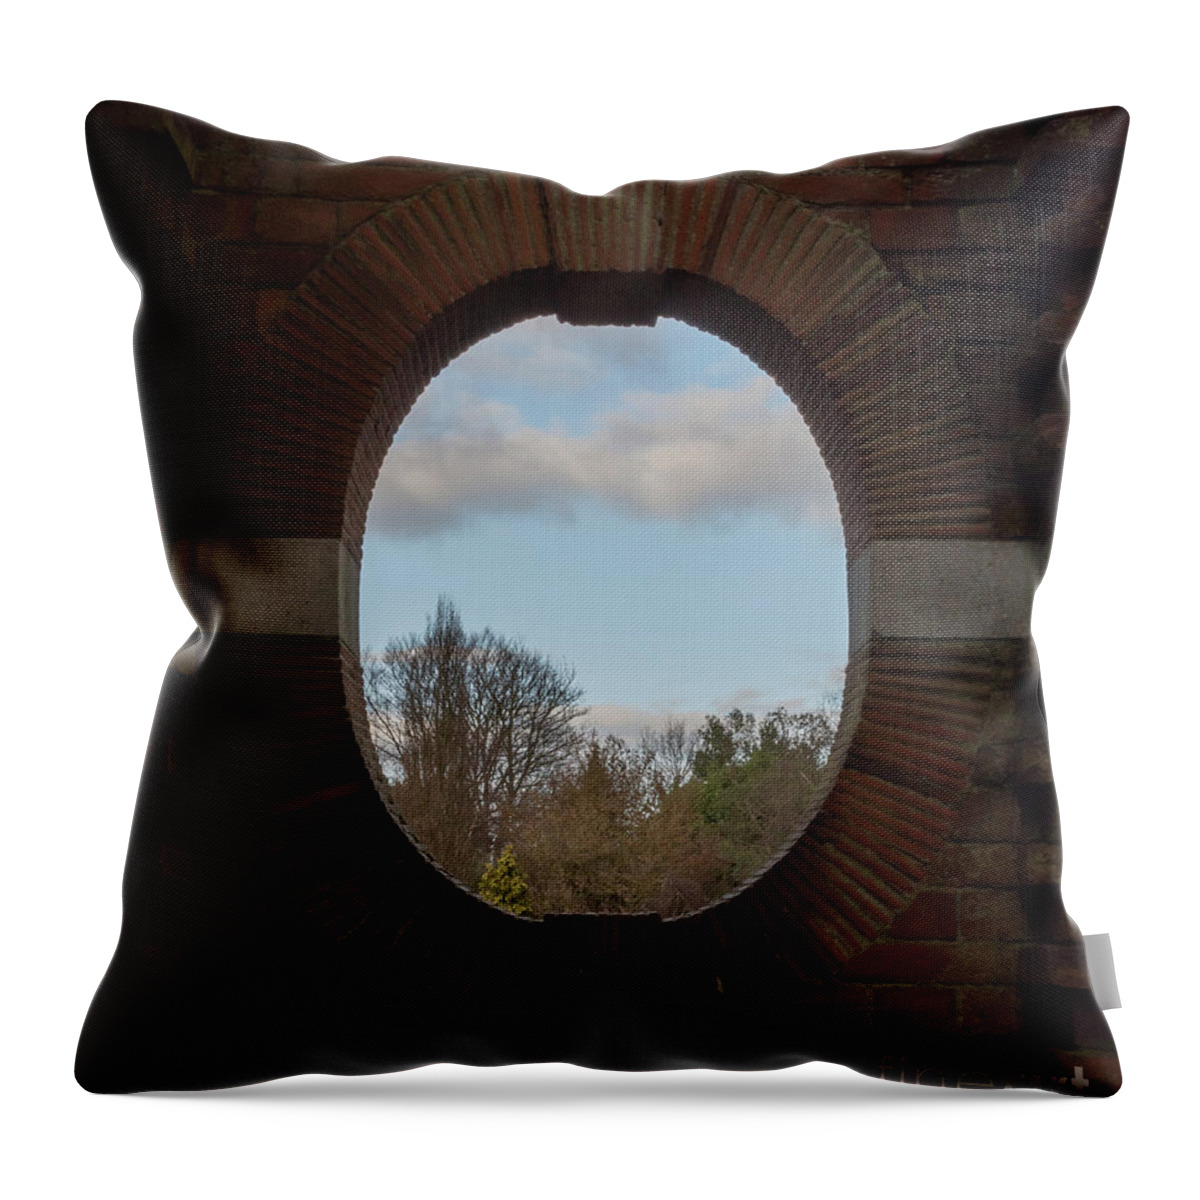 Architectural Throw Pillow featuring the photograph Architectural Aperture by Perry Rodriguez